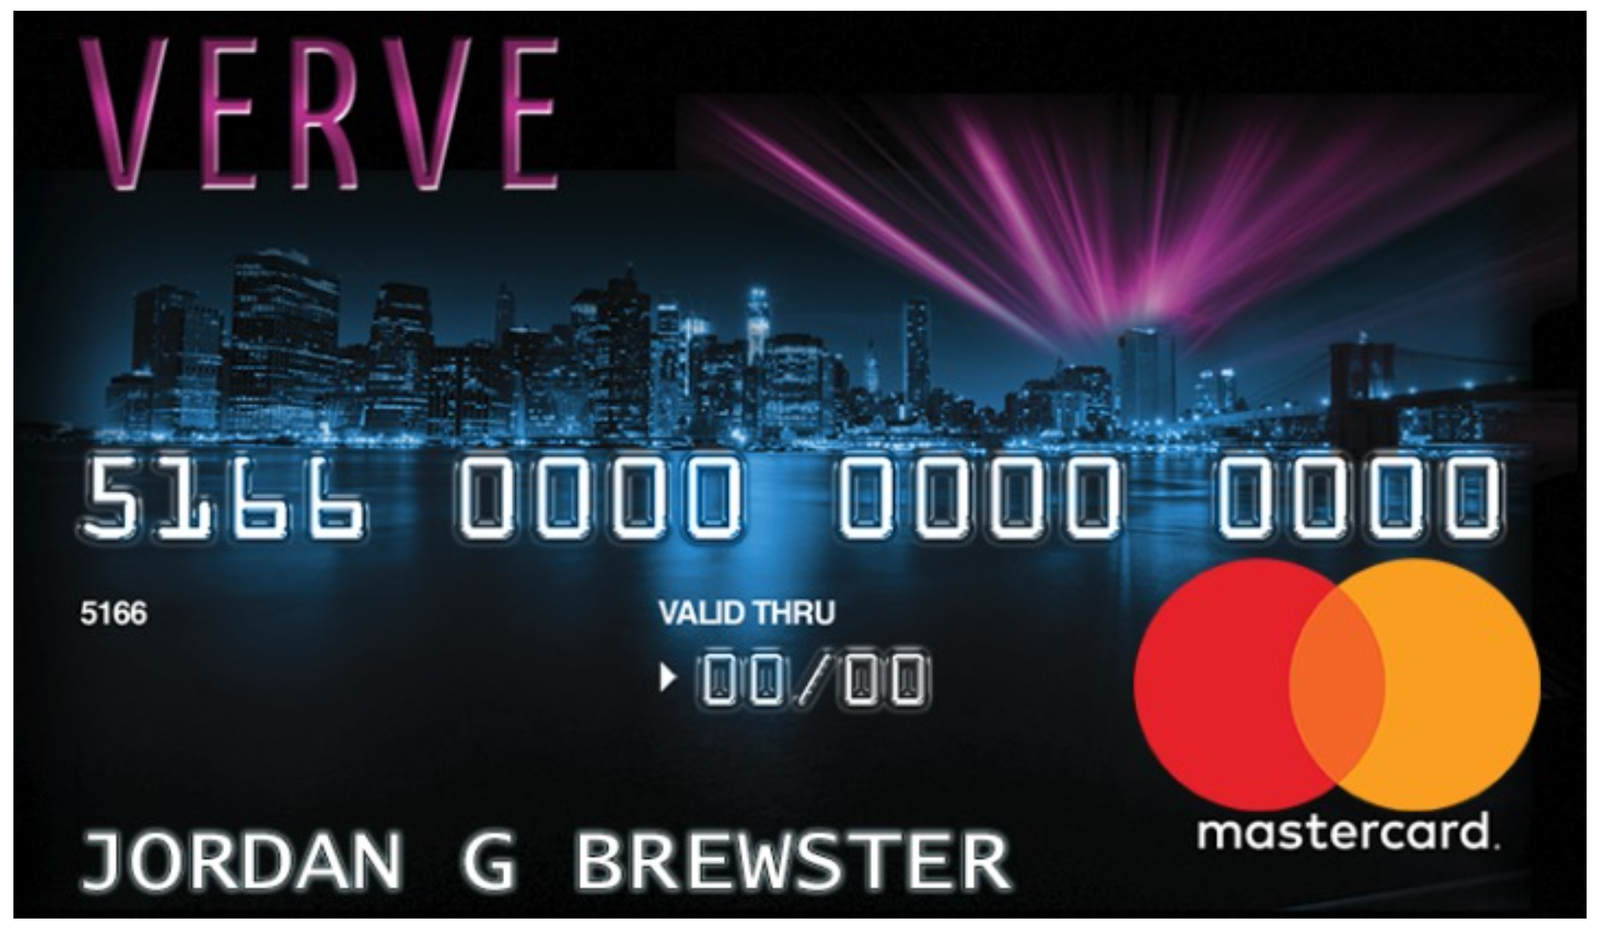 Verve Credit Card Review – Pros and Cons